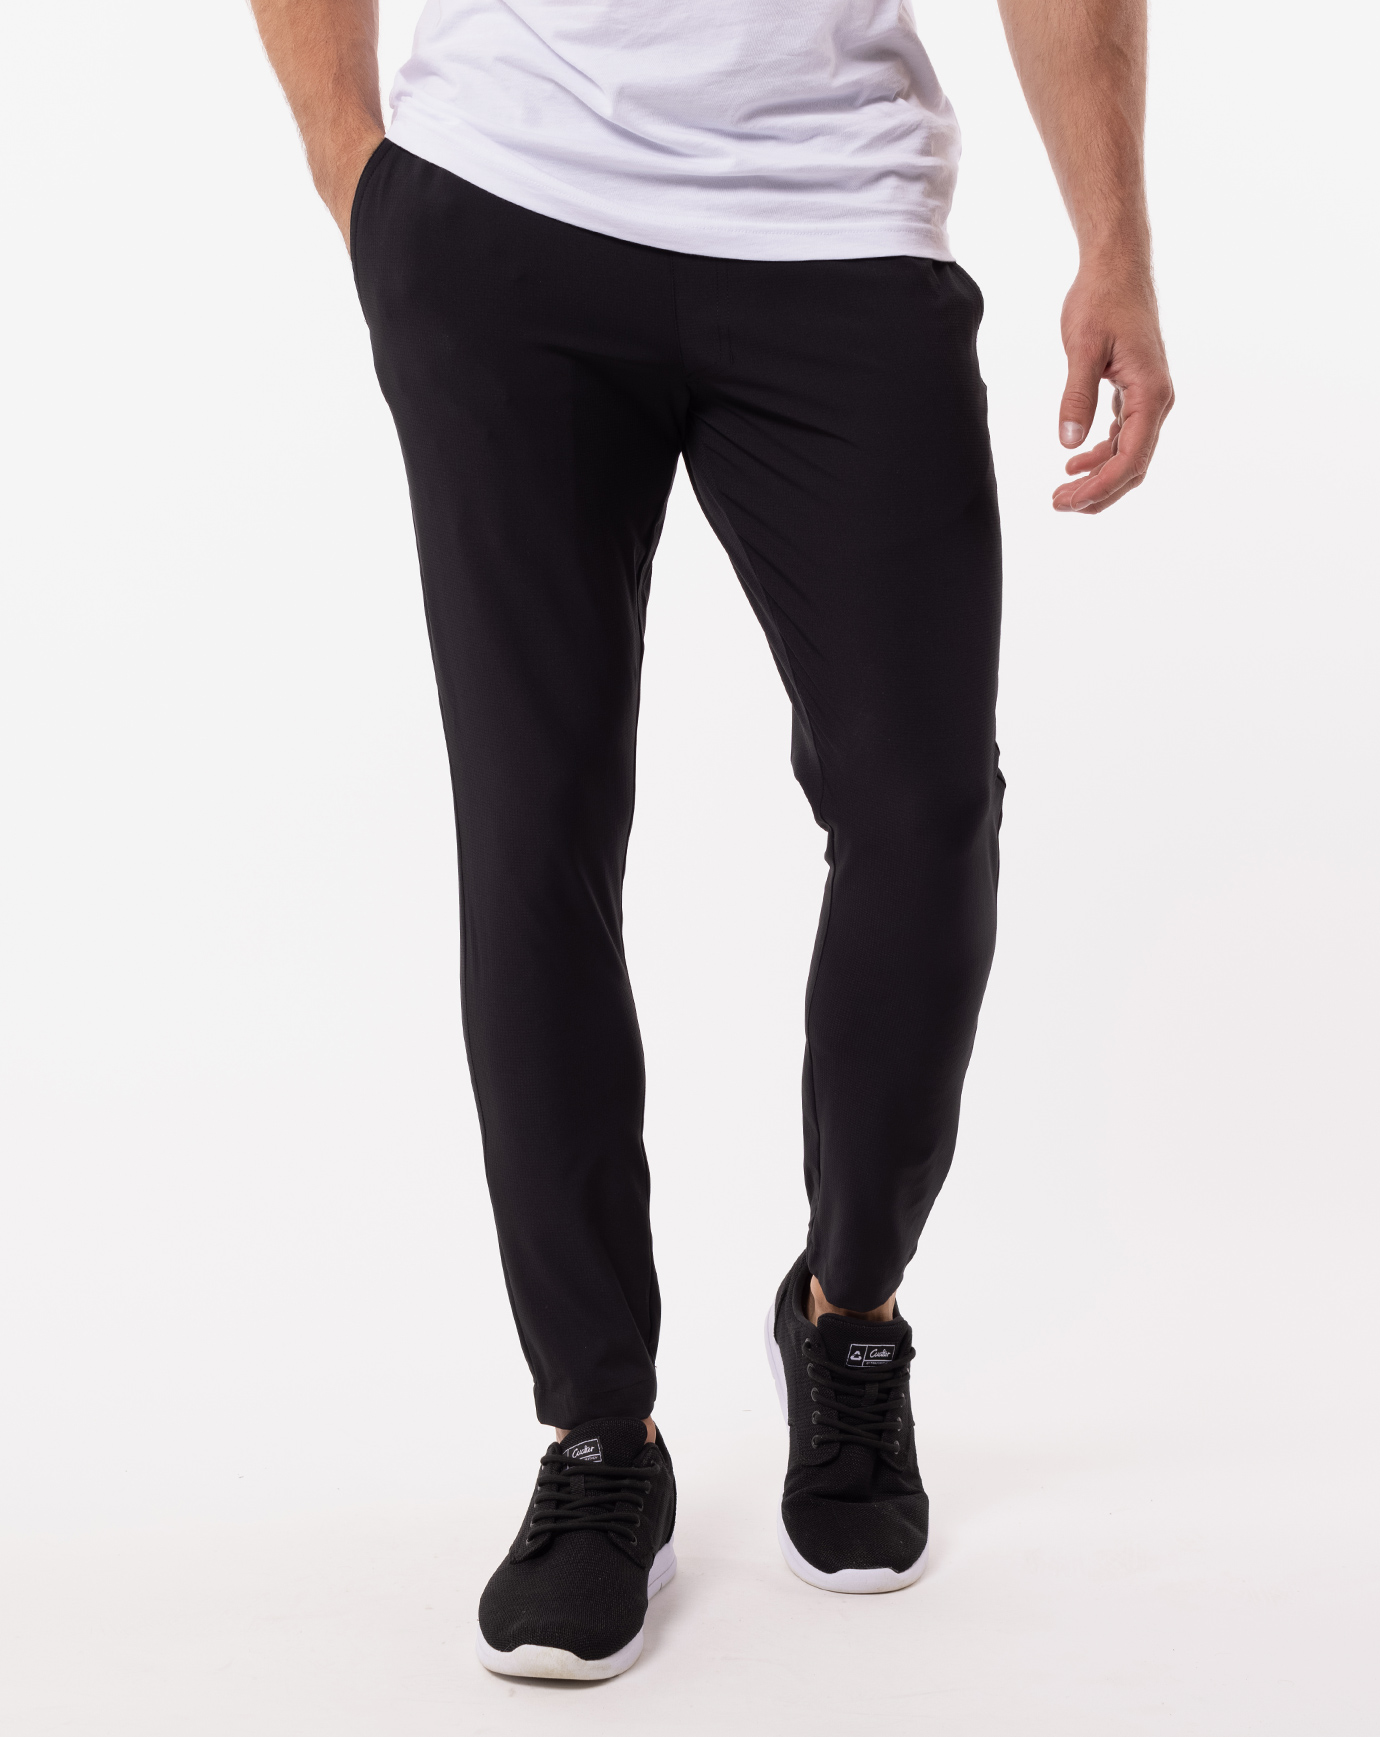 TRAVEL ACTIVE PANT 2.0 1